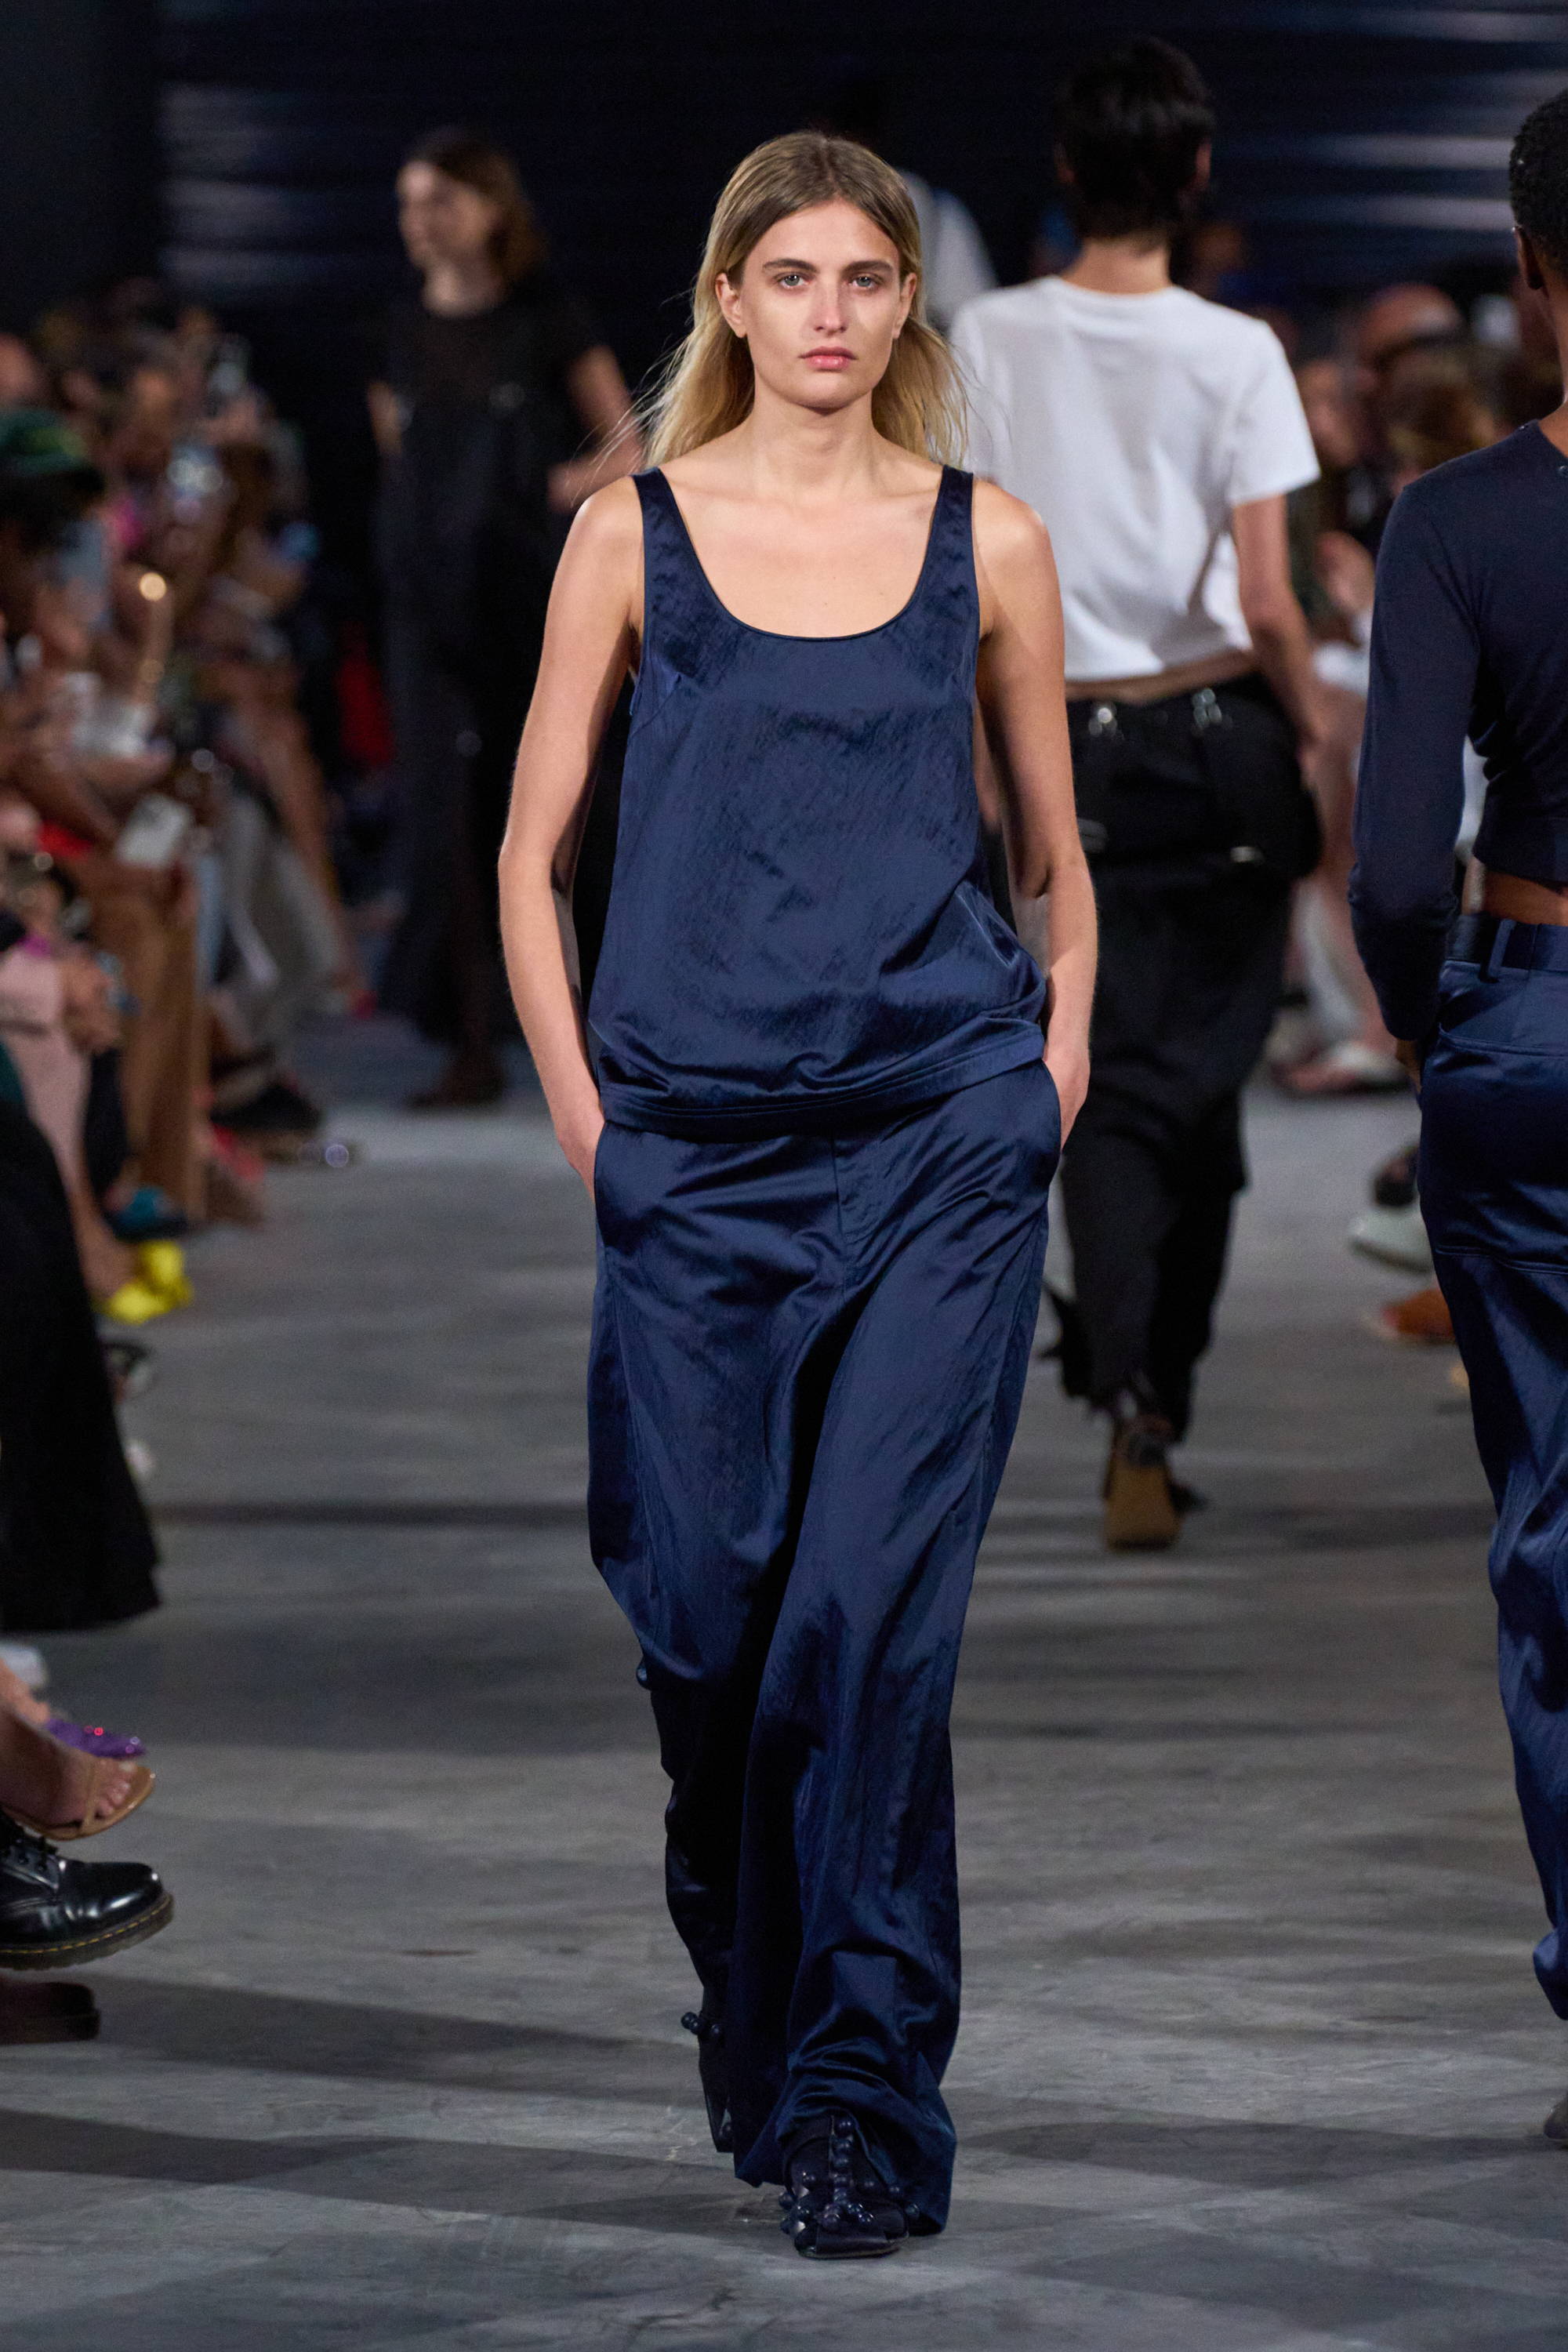 Model on a runway wearing tank top and pants